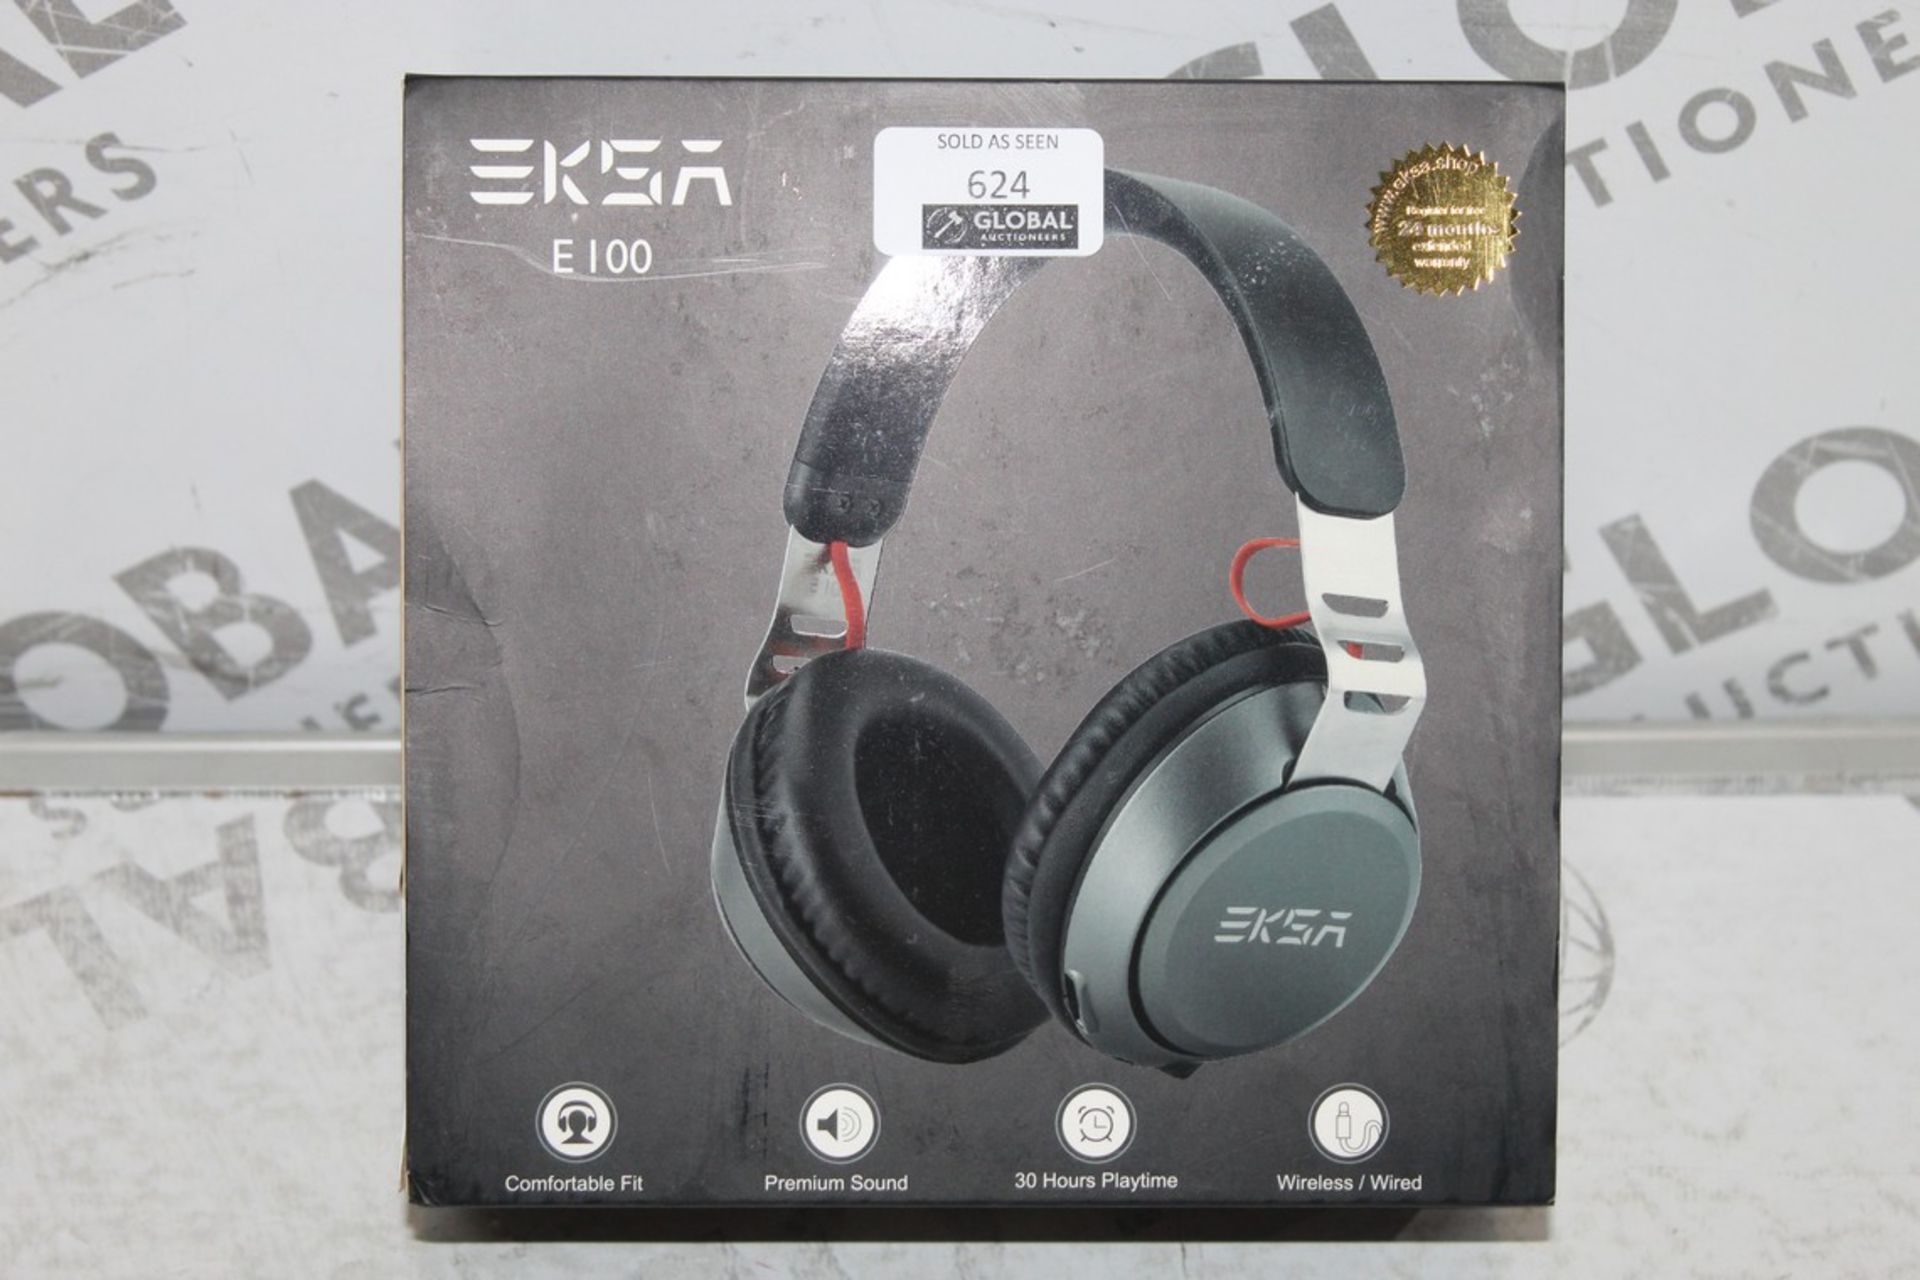 Boxed Pair of EKSA E100 Wired or Wireless Headphon